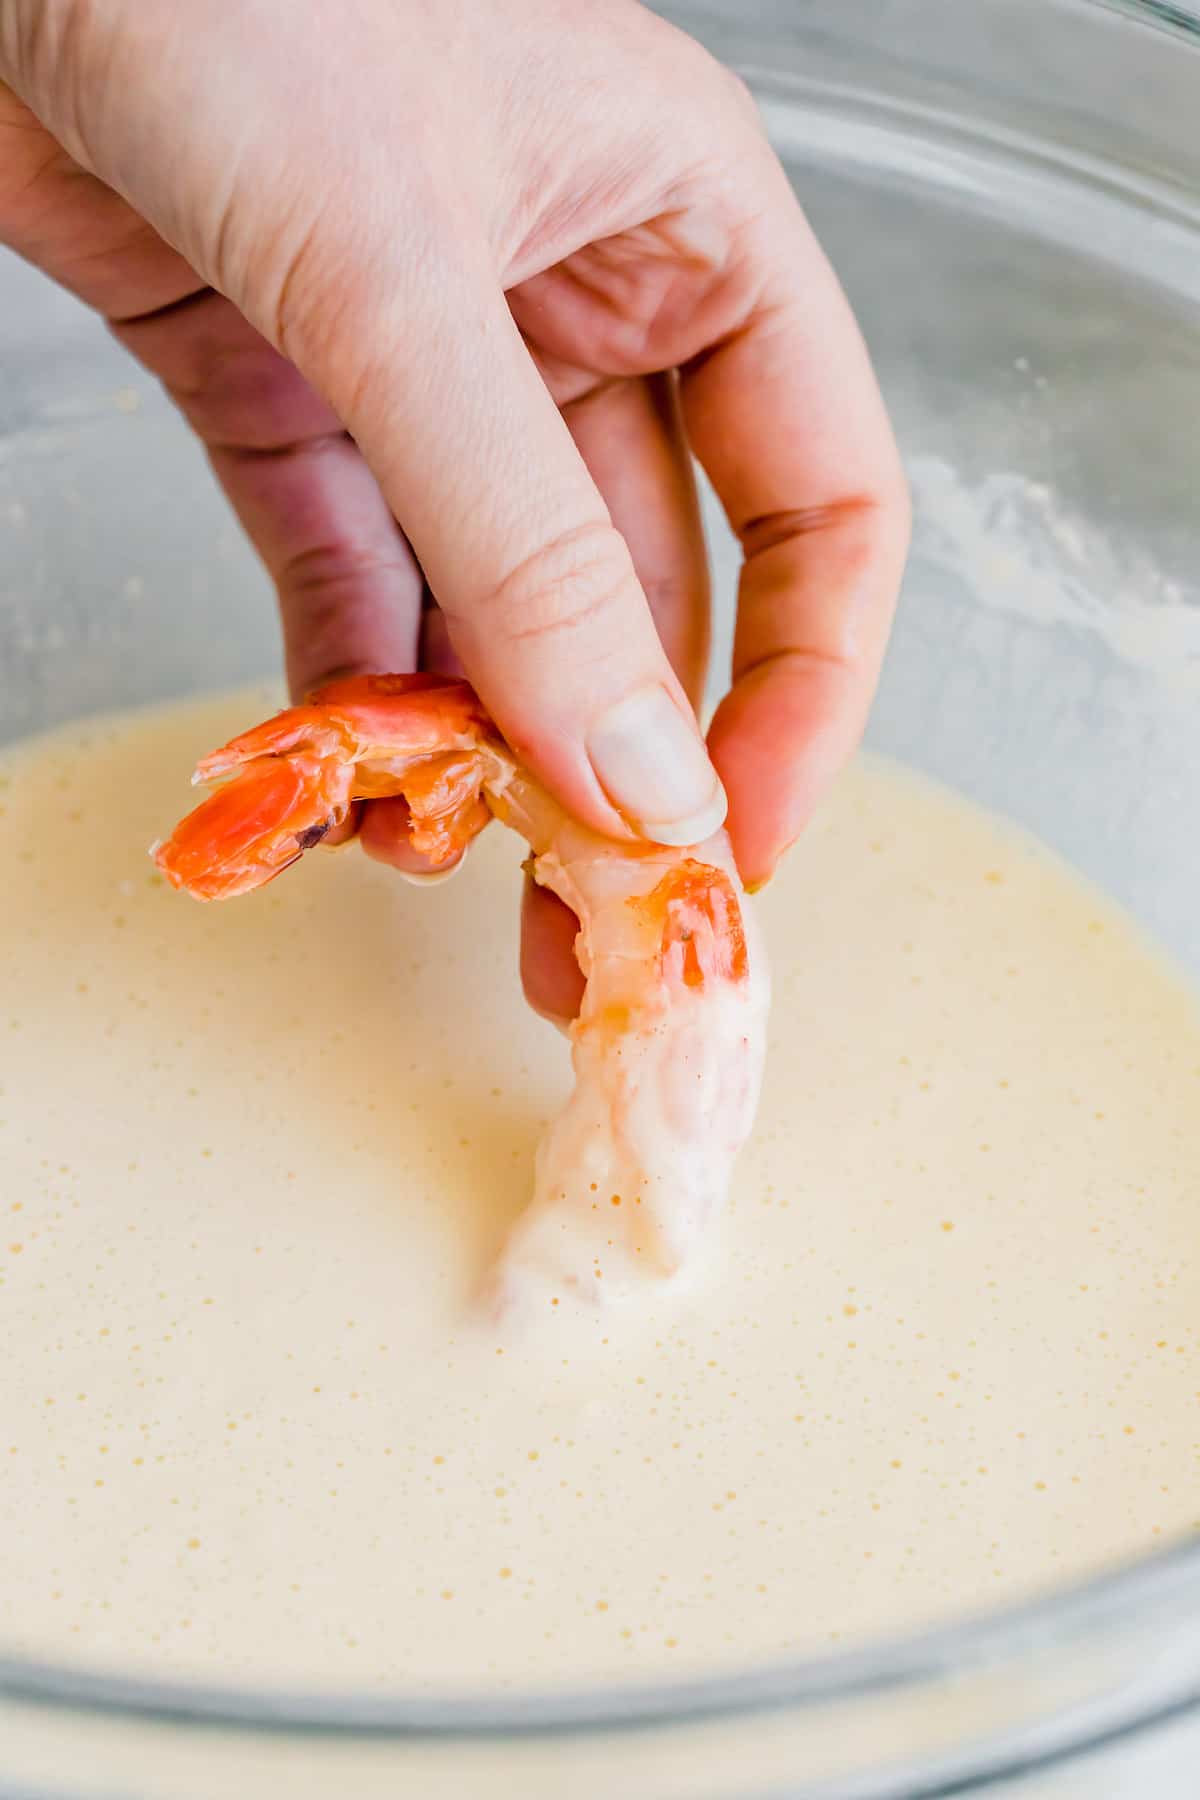 A Raw Shrimp Being Dunked Into a Bowl of Tempura Batter